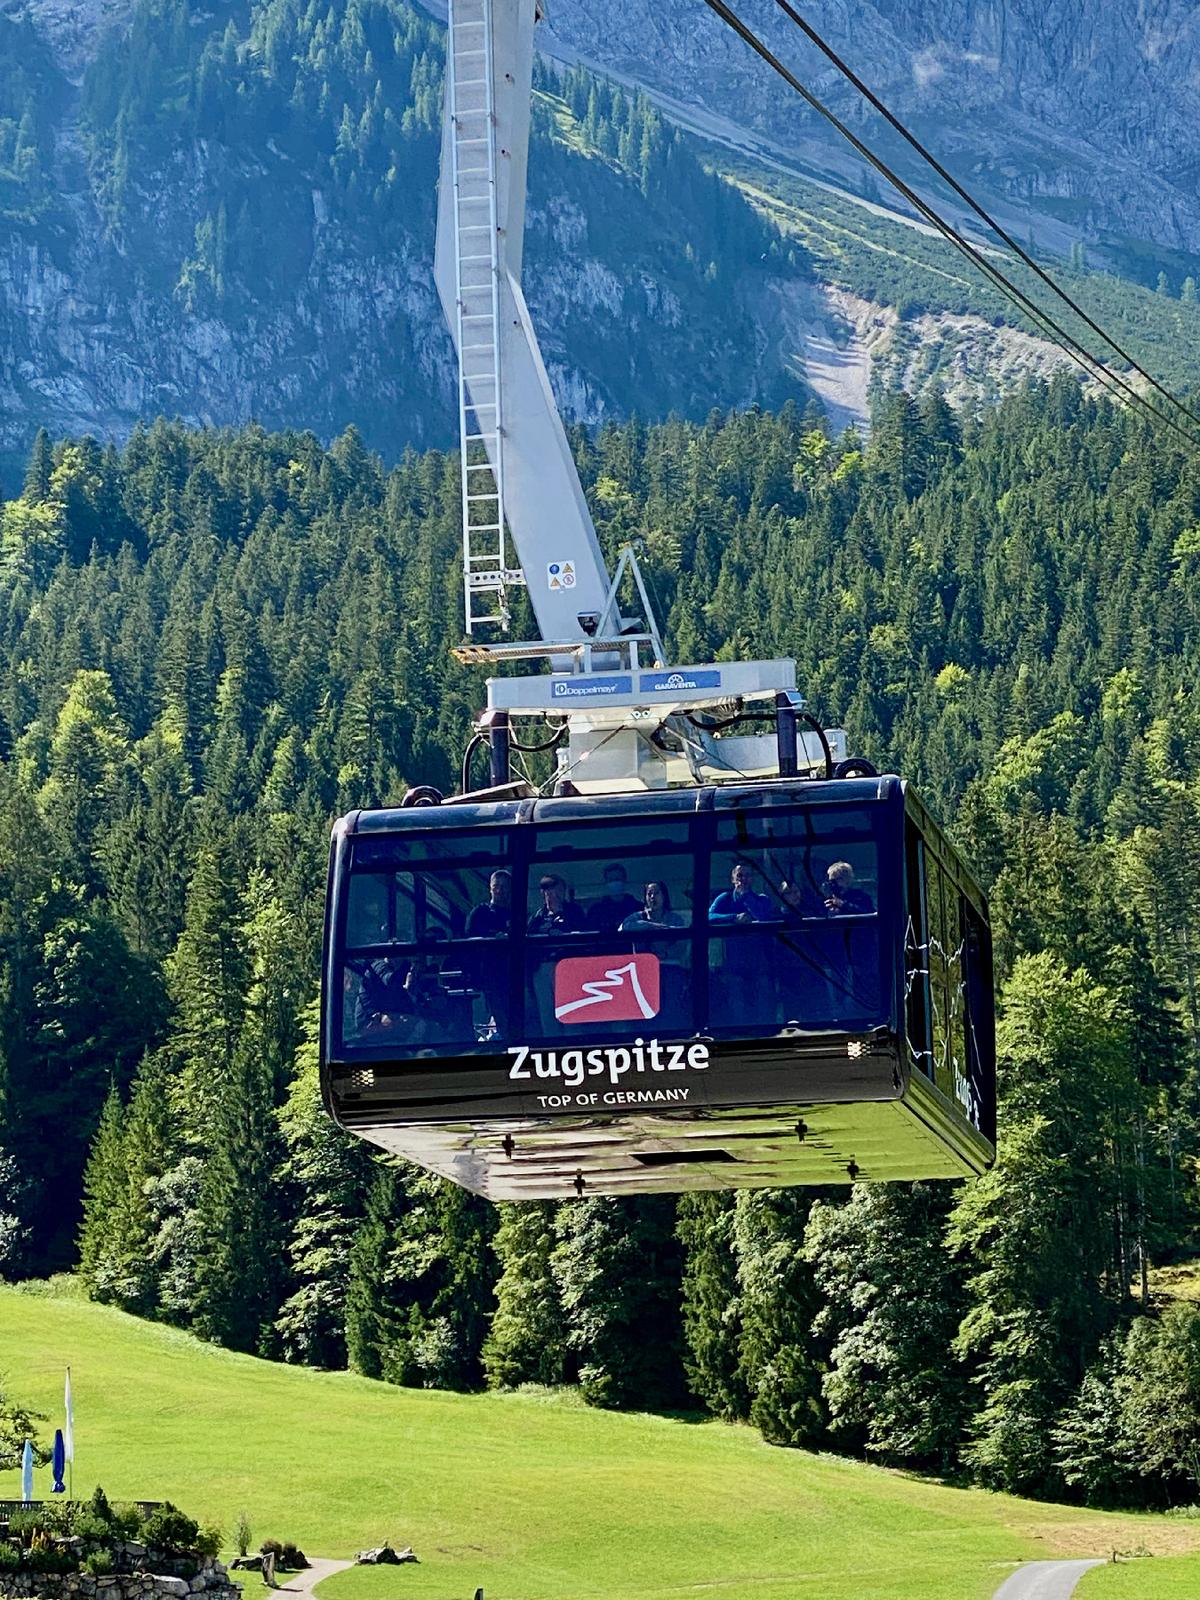 The Zugspitze cable car takes visitors in Garmisch-Partenkirchen, Germany, to the summit of the Zugspitze. (Courtesy of Margot Black.)